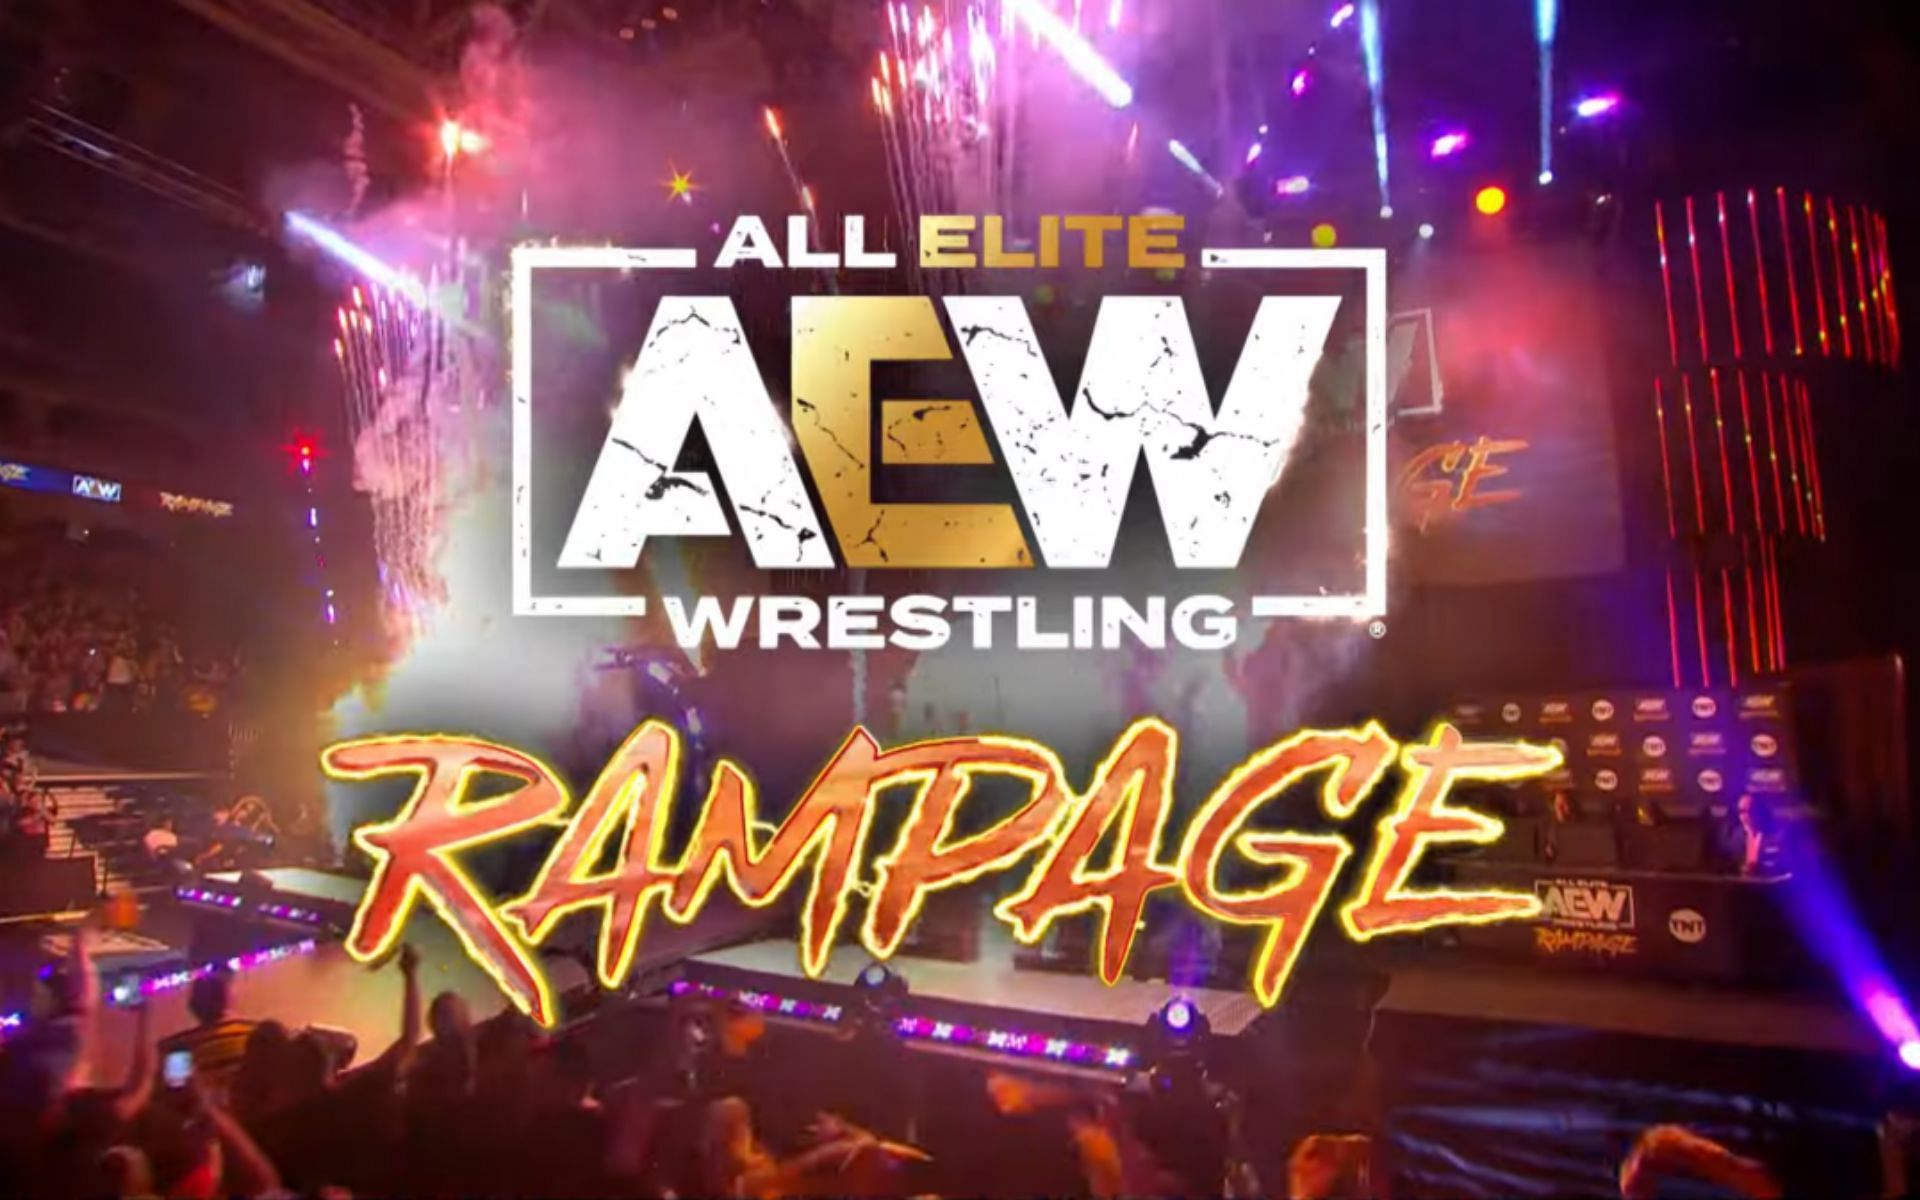 The latest edition of AEW Rampage was taped at the Kia Forum in Los Angeles CA,